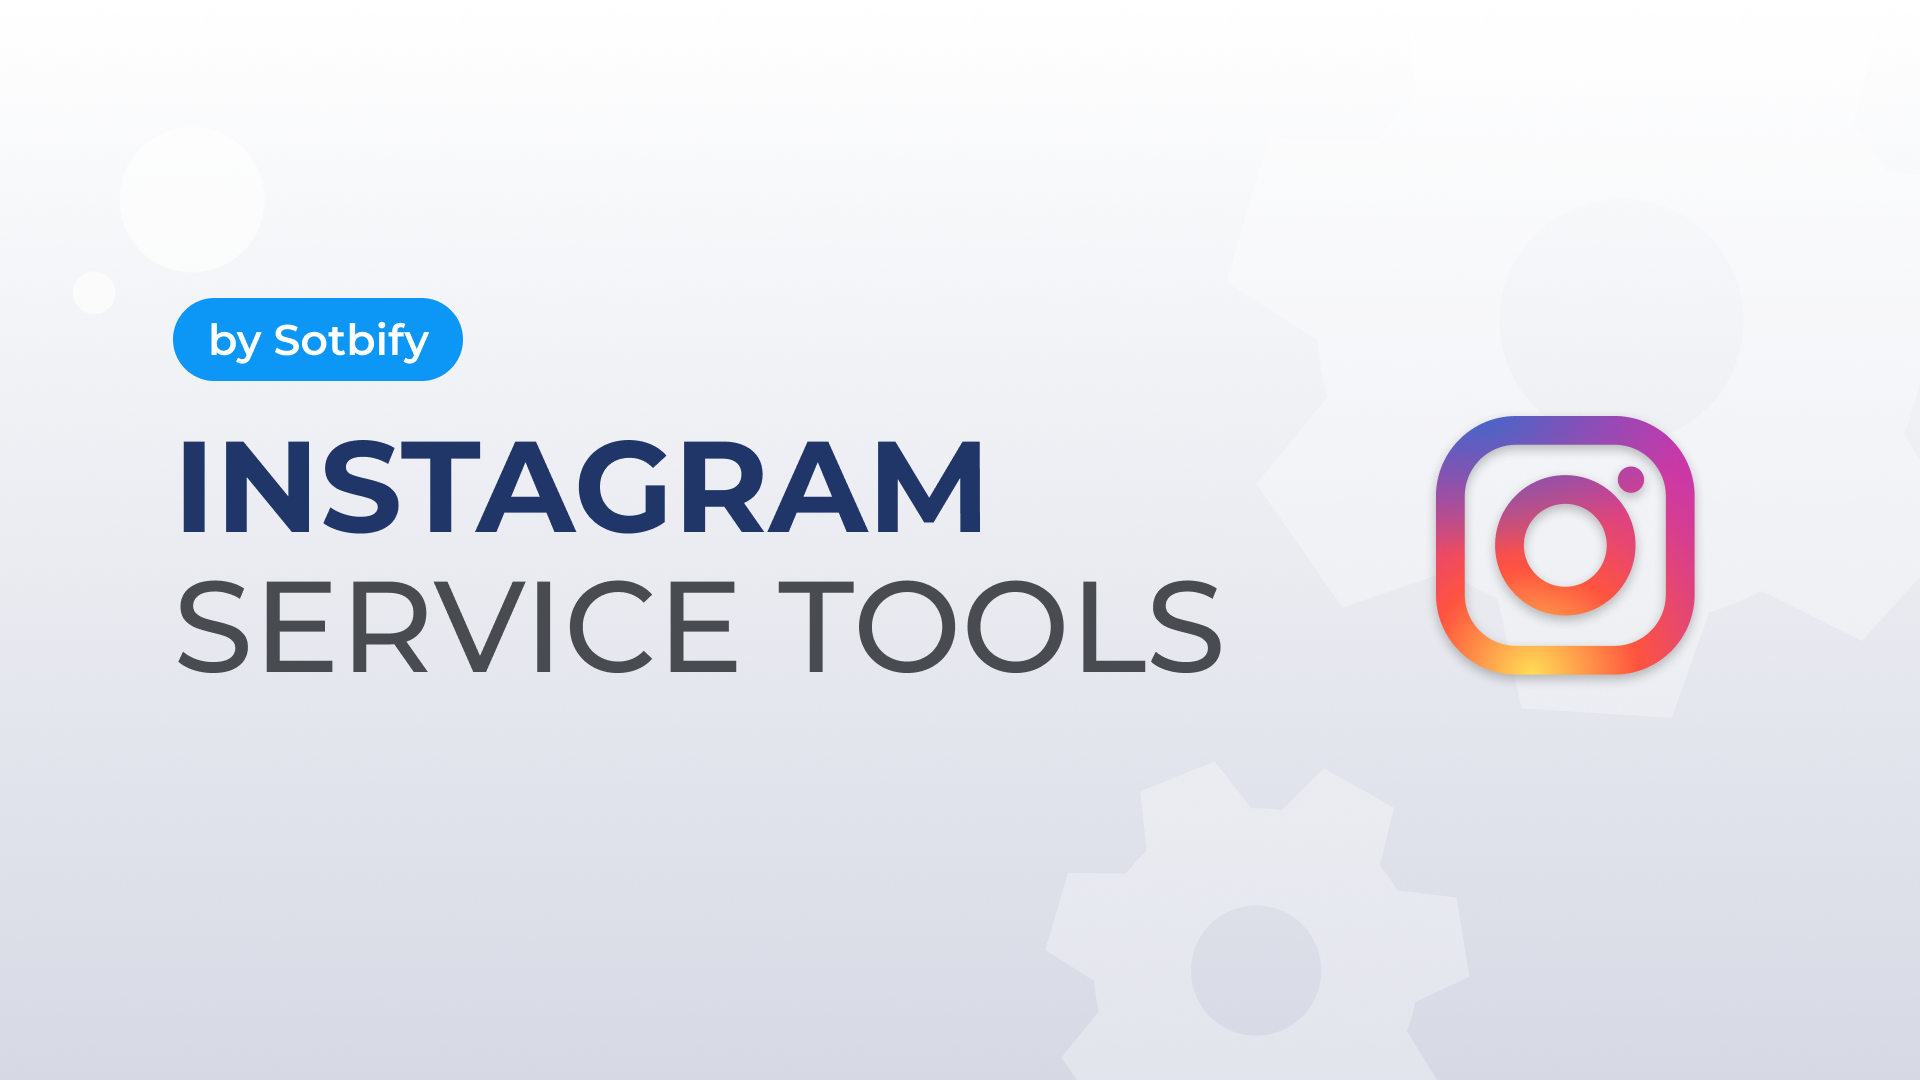 Instagram Service Tooles — Our First Shopify App